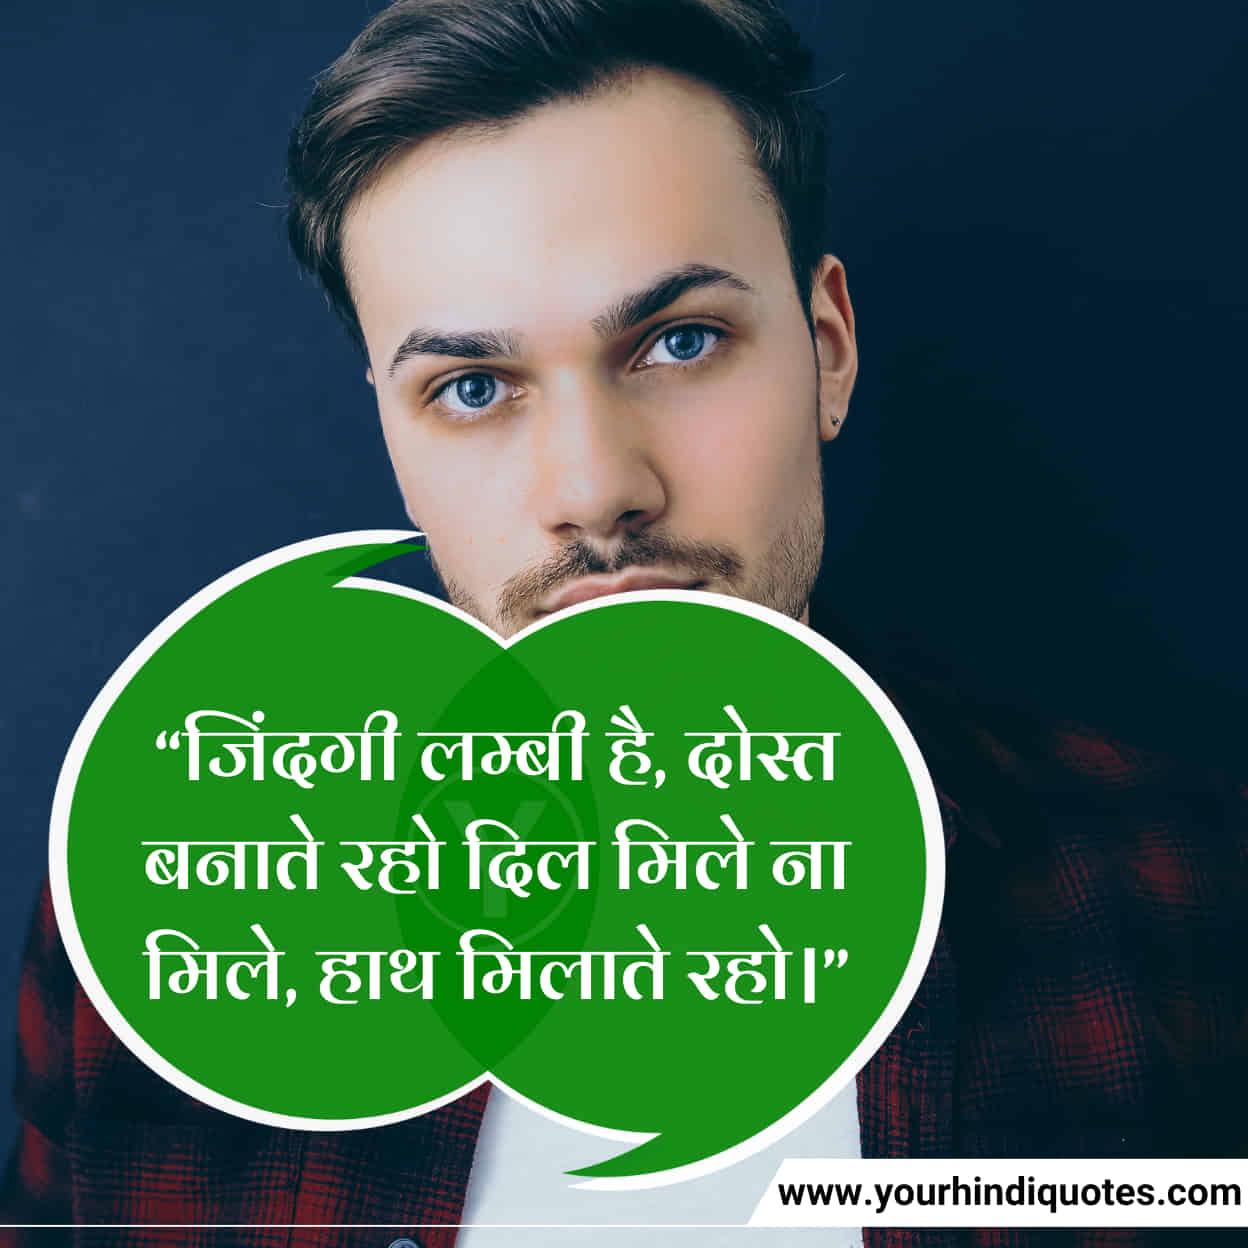 Latest Hindi Friendship Day Quotes